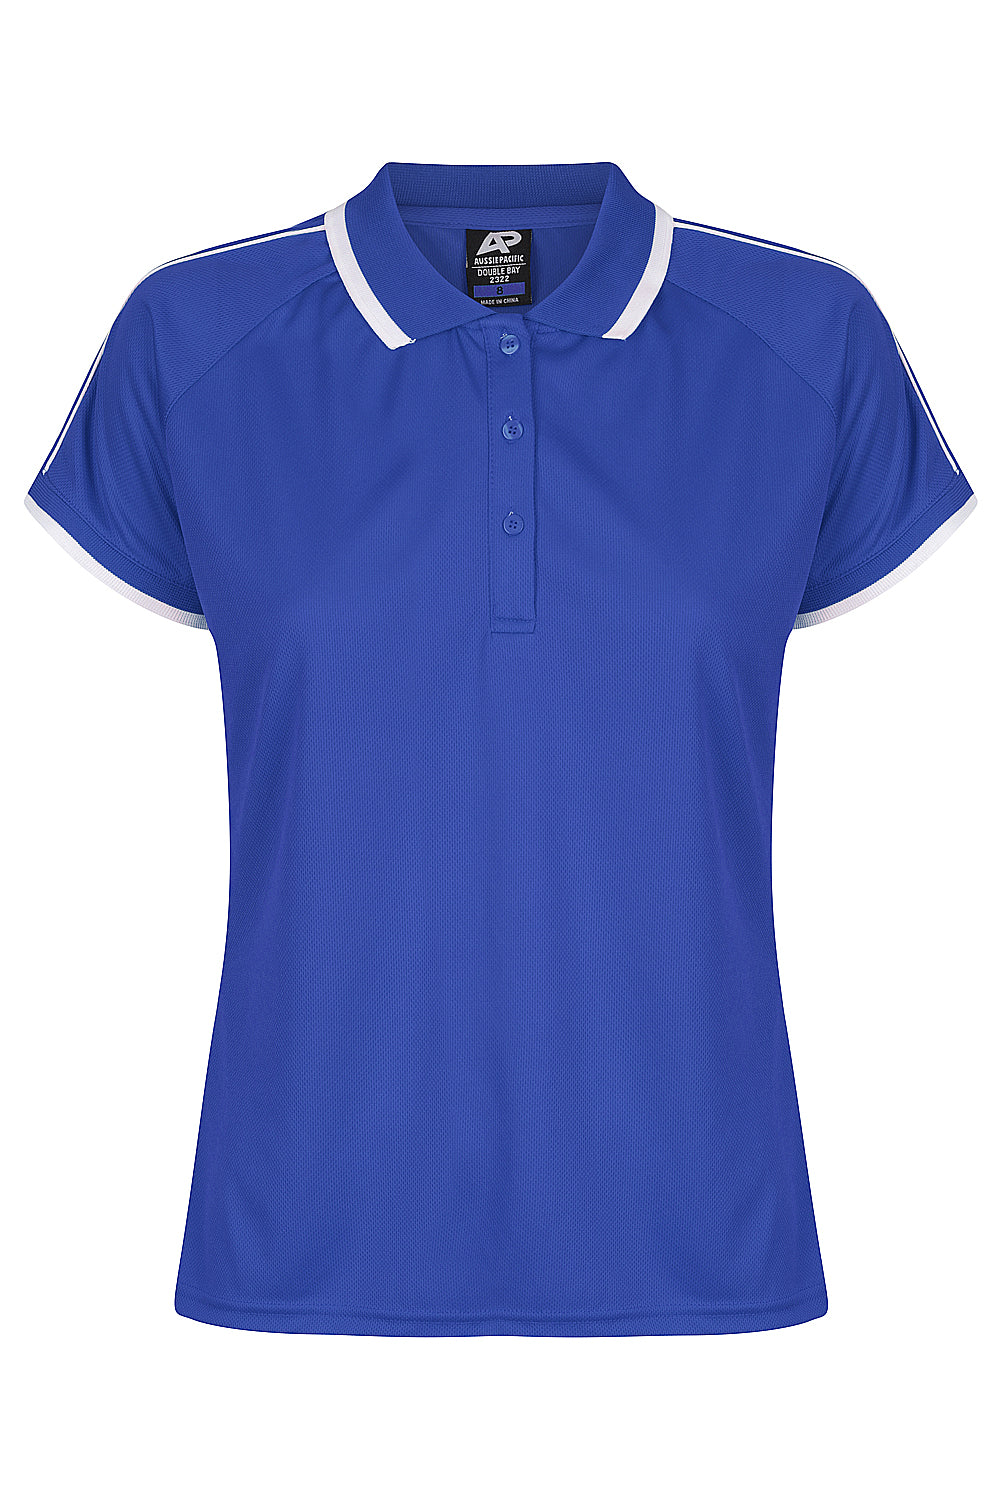 DOUBLE BAY LADY POLOS - 2322-Aussie Pacific-7